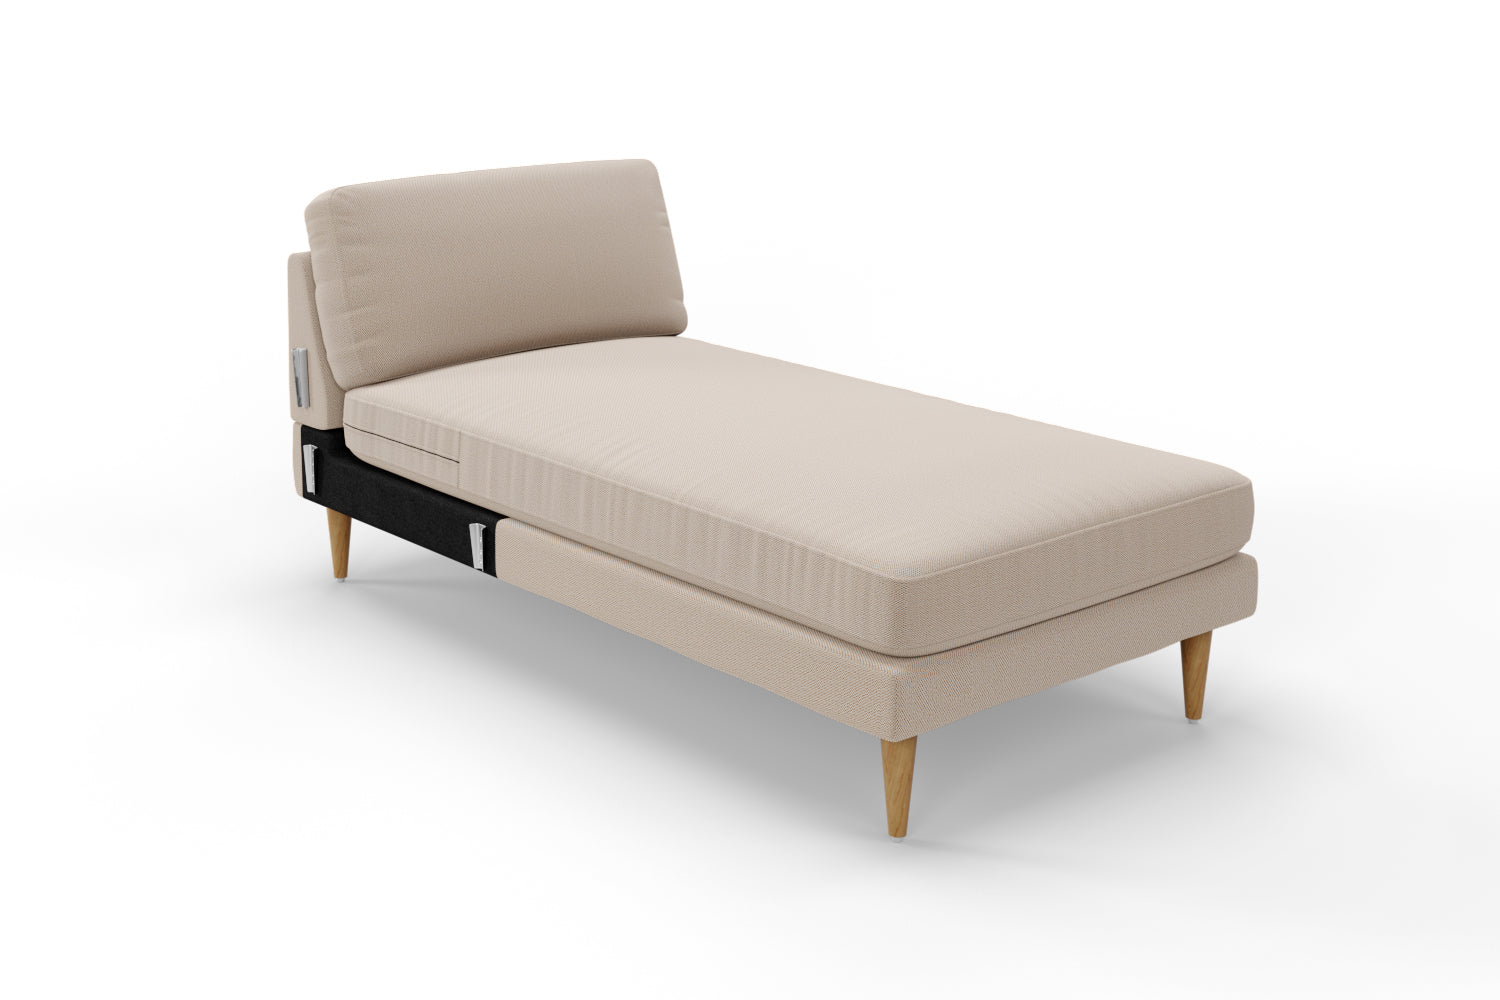 SNUG | The Big Chill Left Hand Chaise Unit in Oatmeal